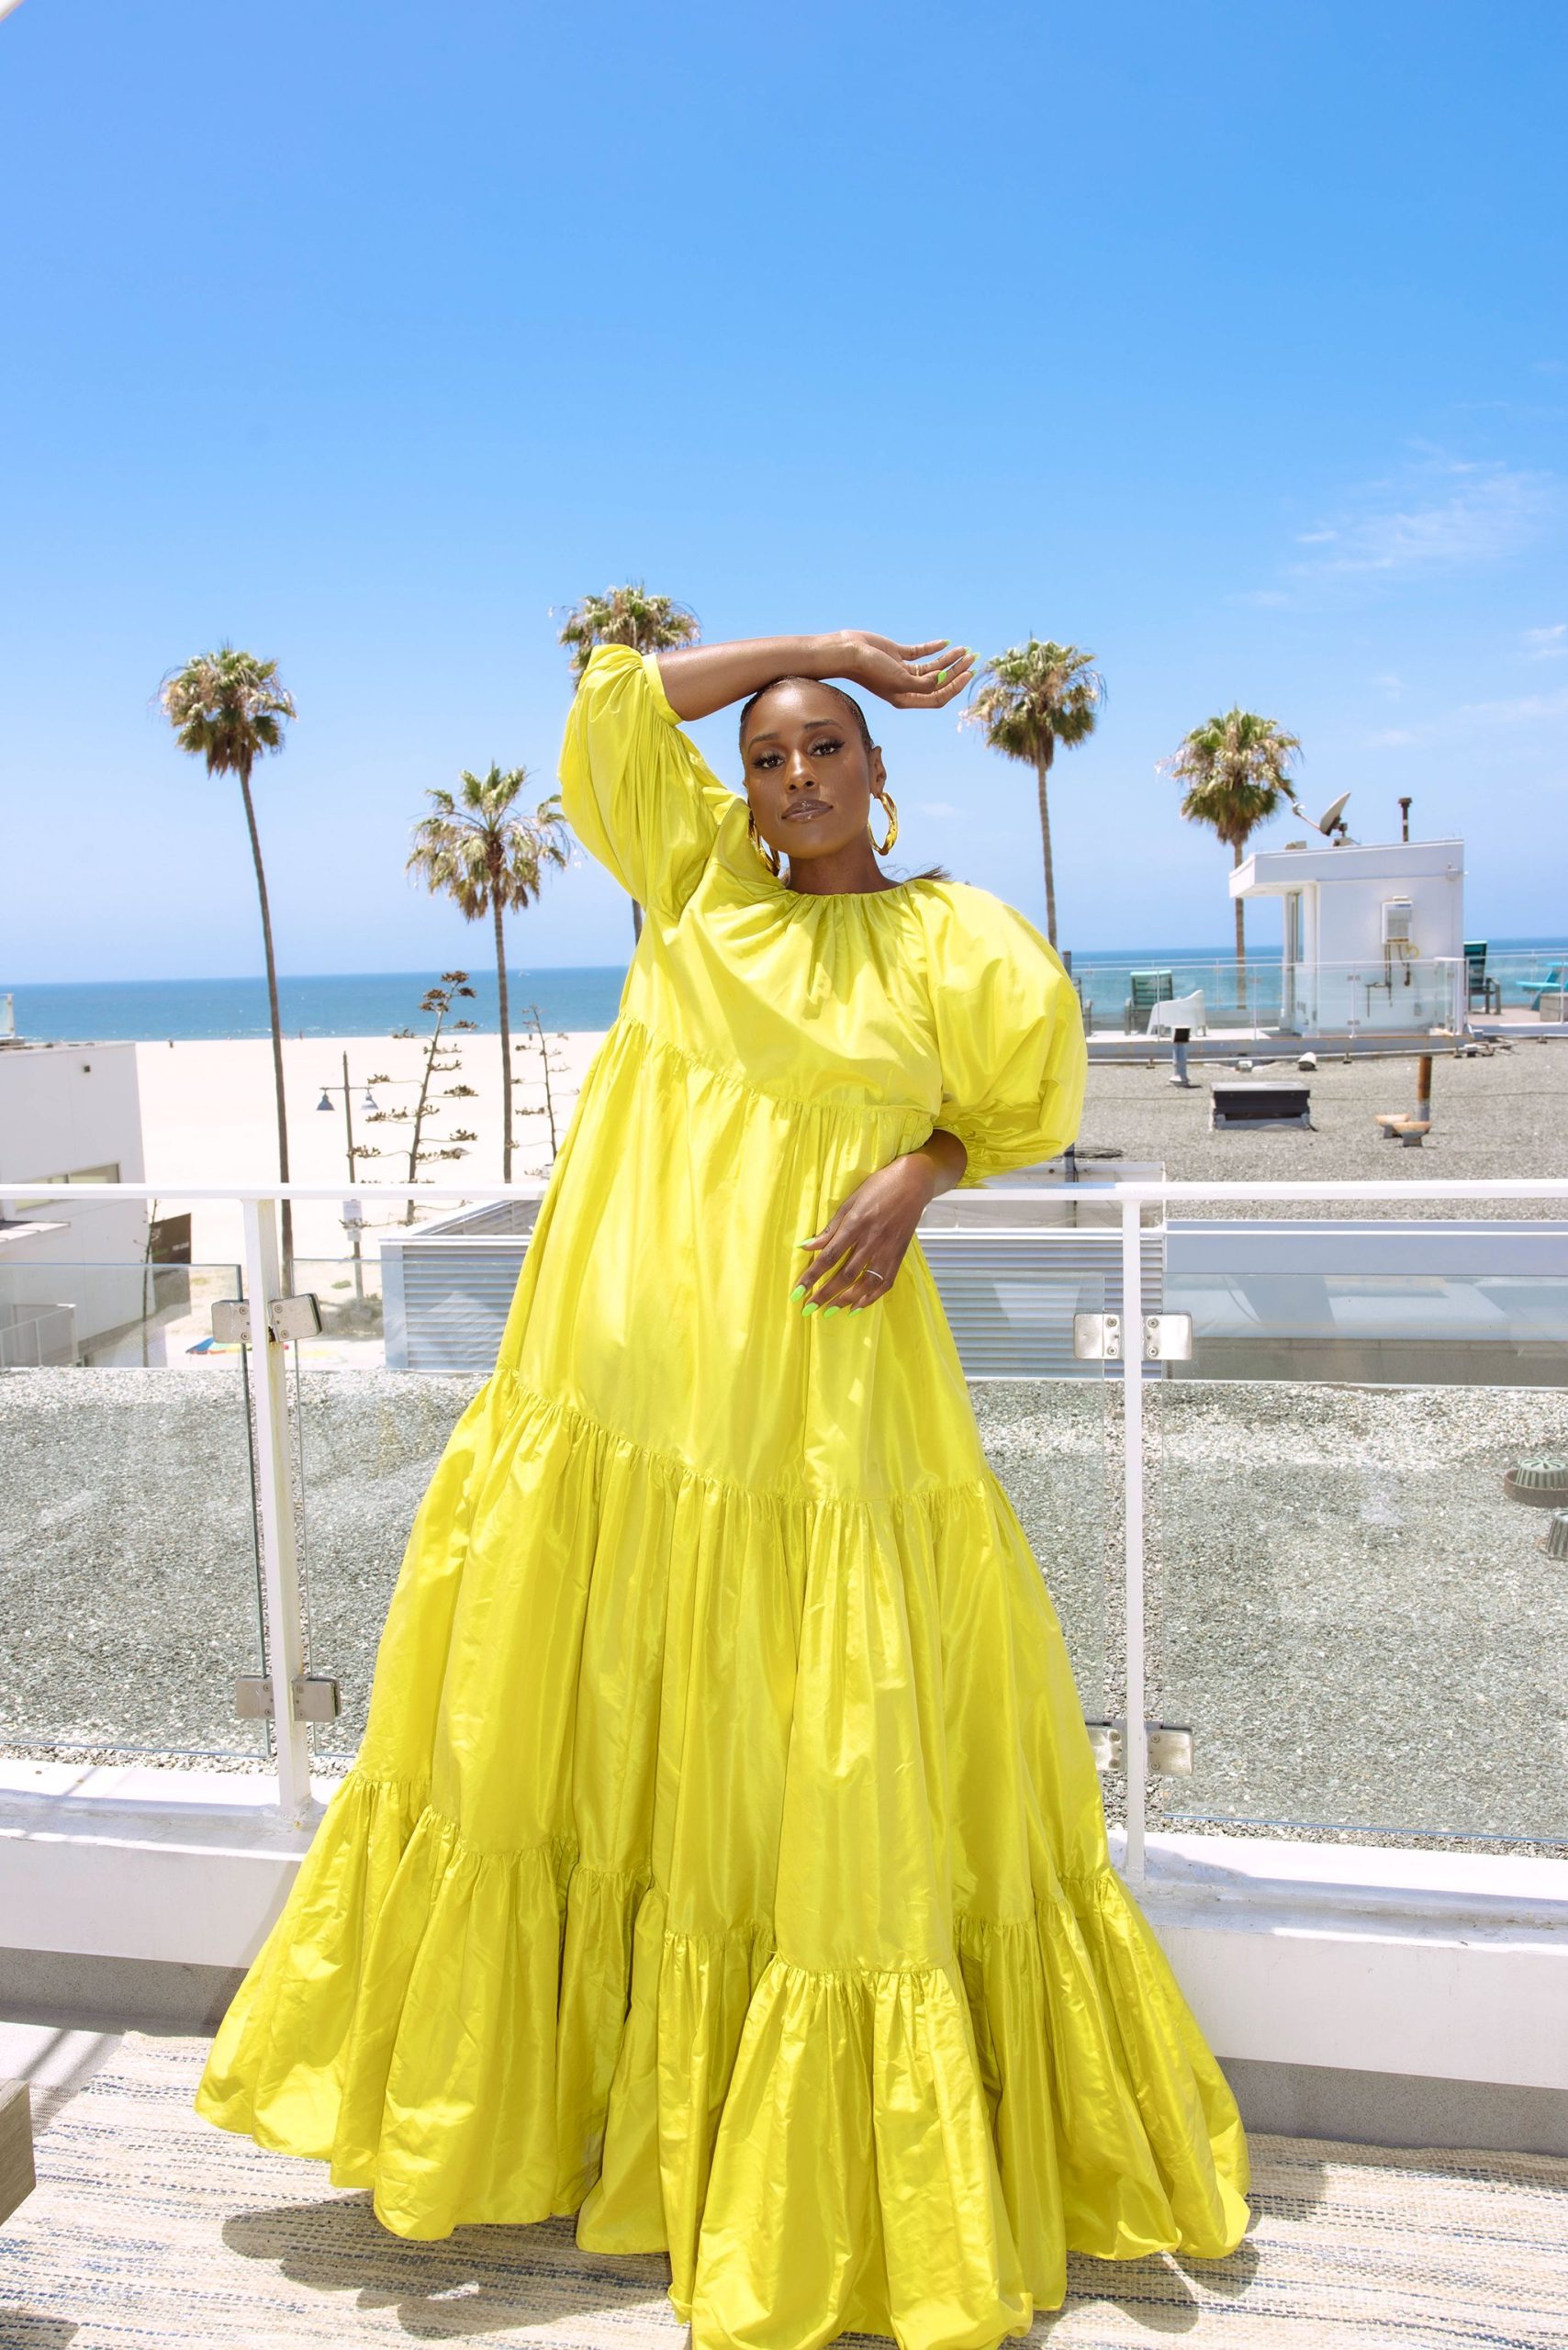 Issa Rae’s Day Of ‘Rap Sh!t’ Press, Glam, Lunch And More With Harper’s BAZAAR